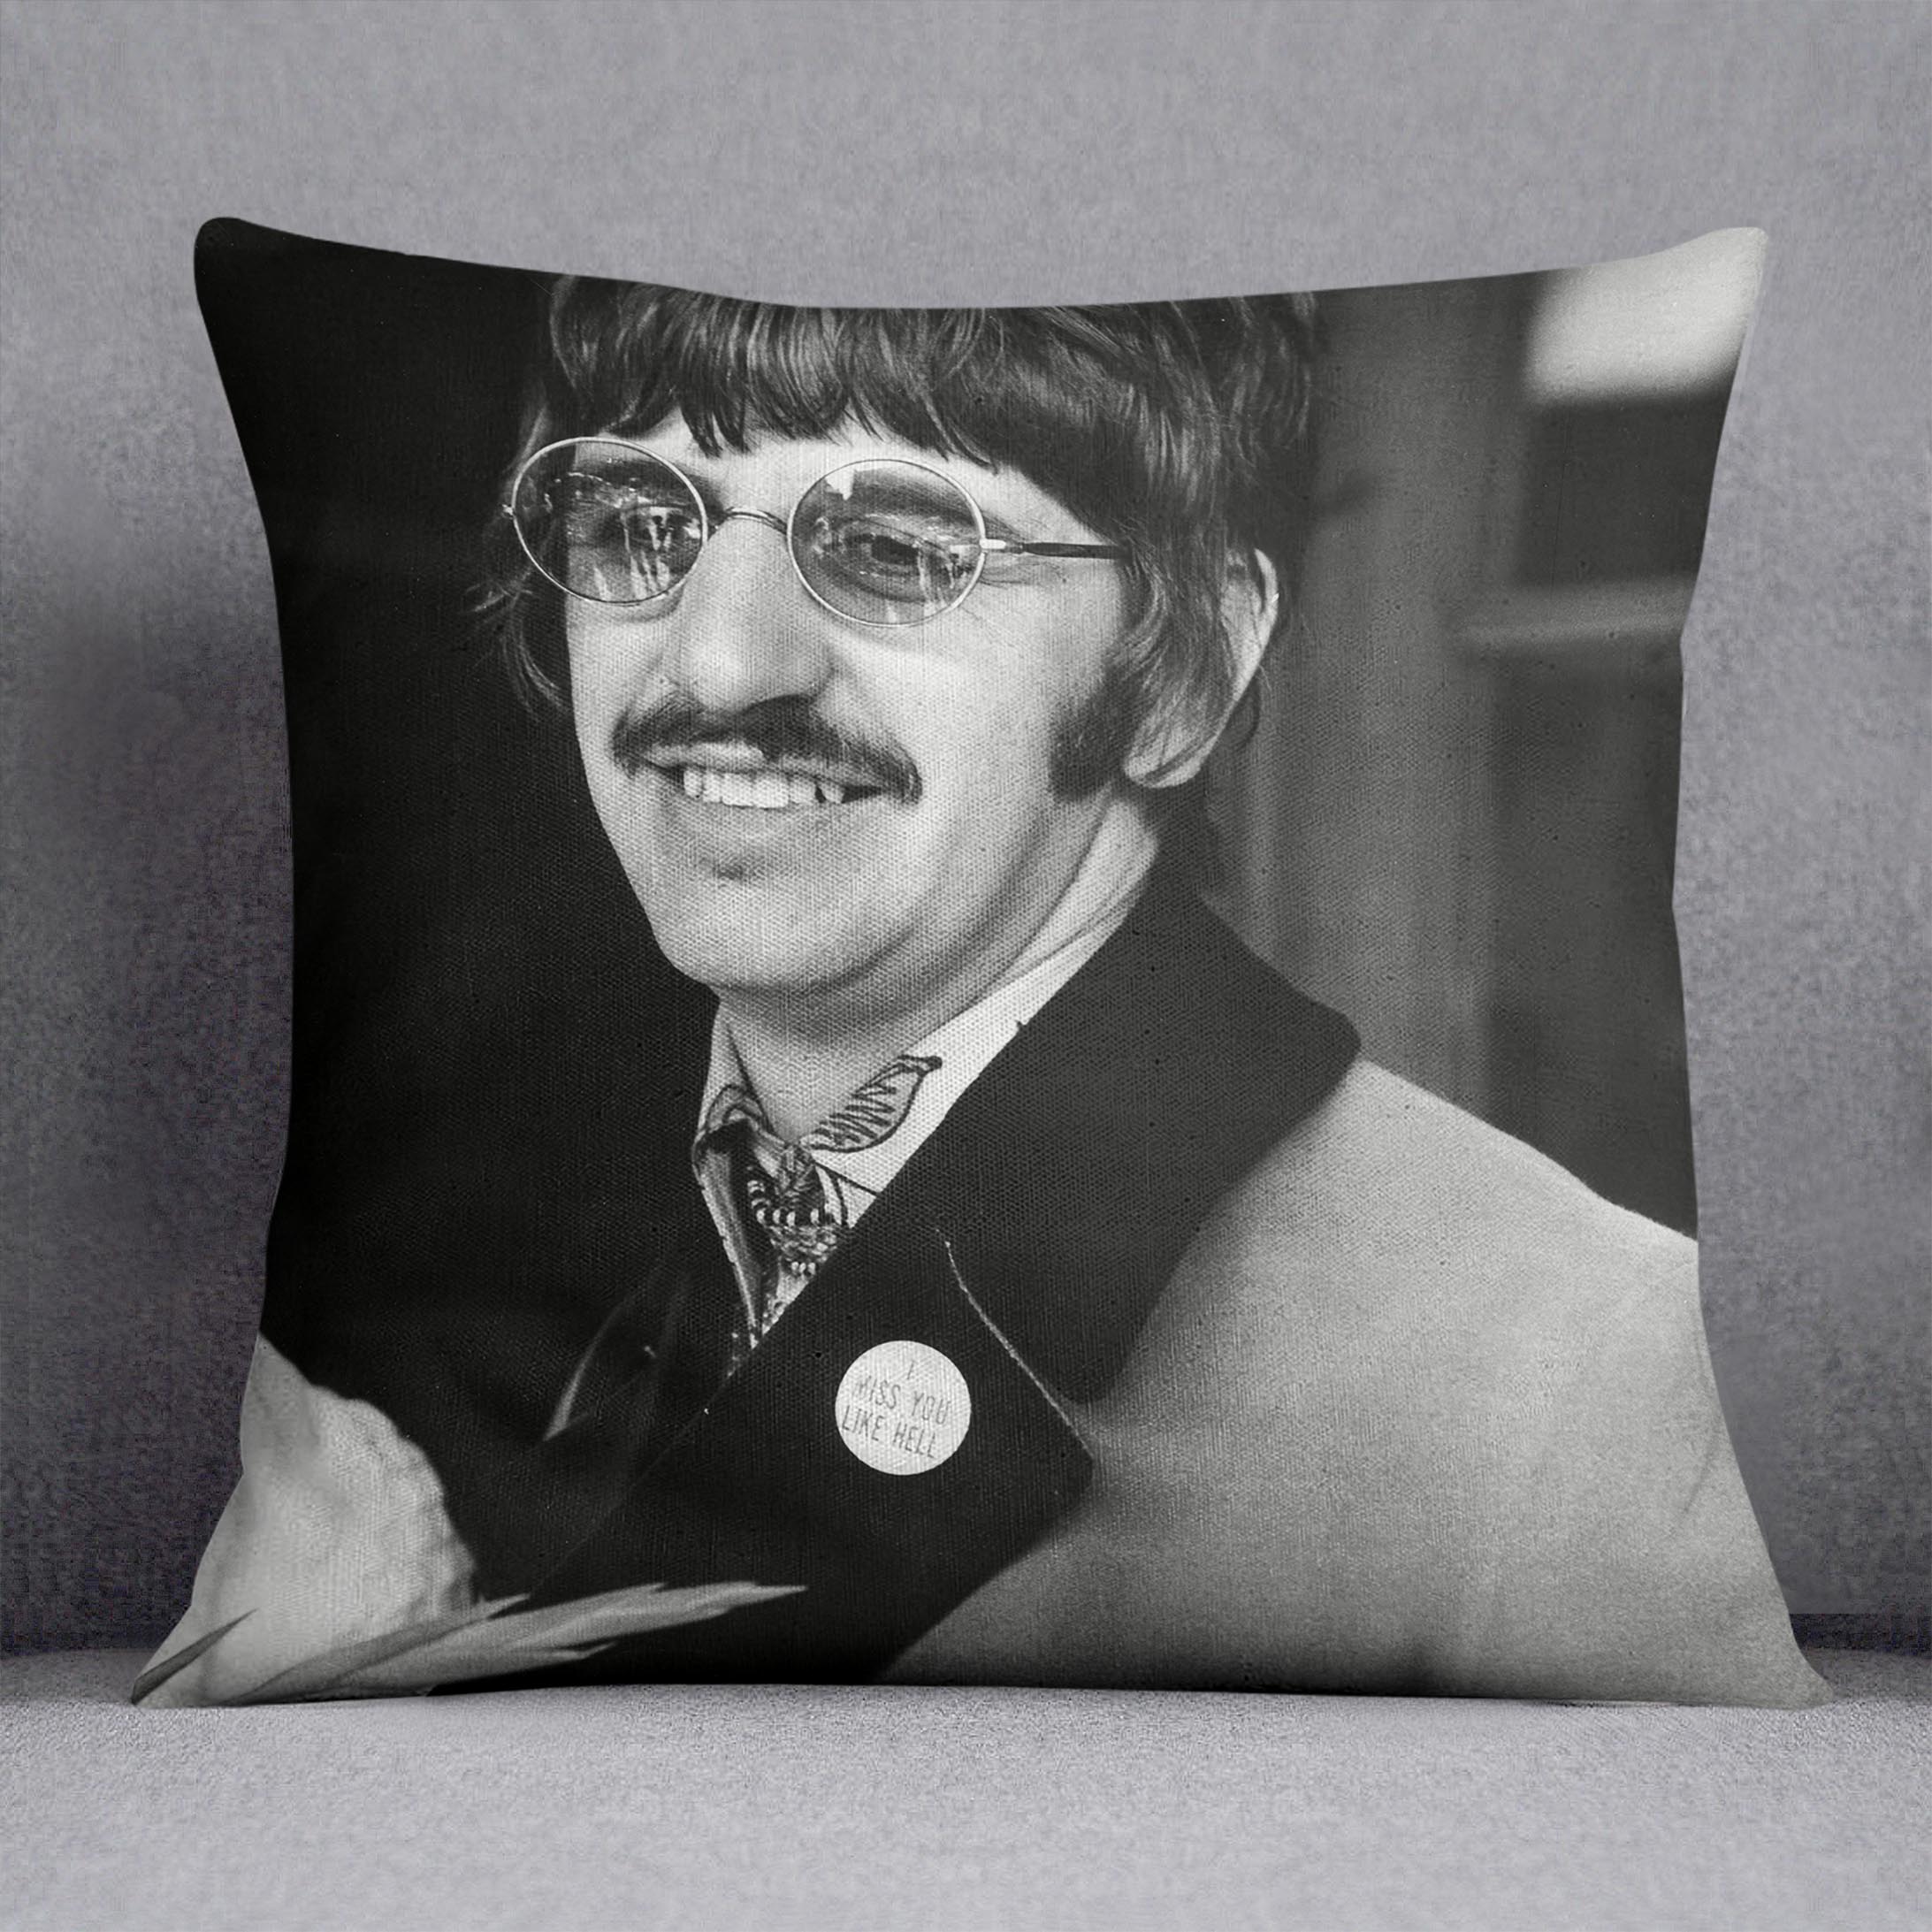 Ringo Starr of The Beatles in 1967 Cushion